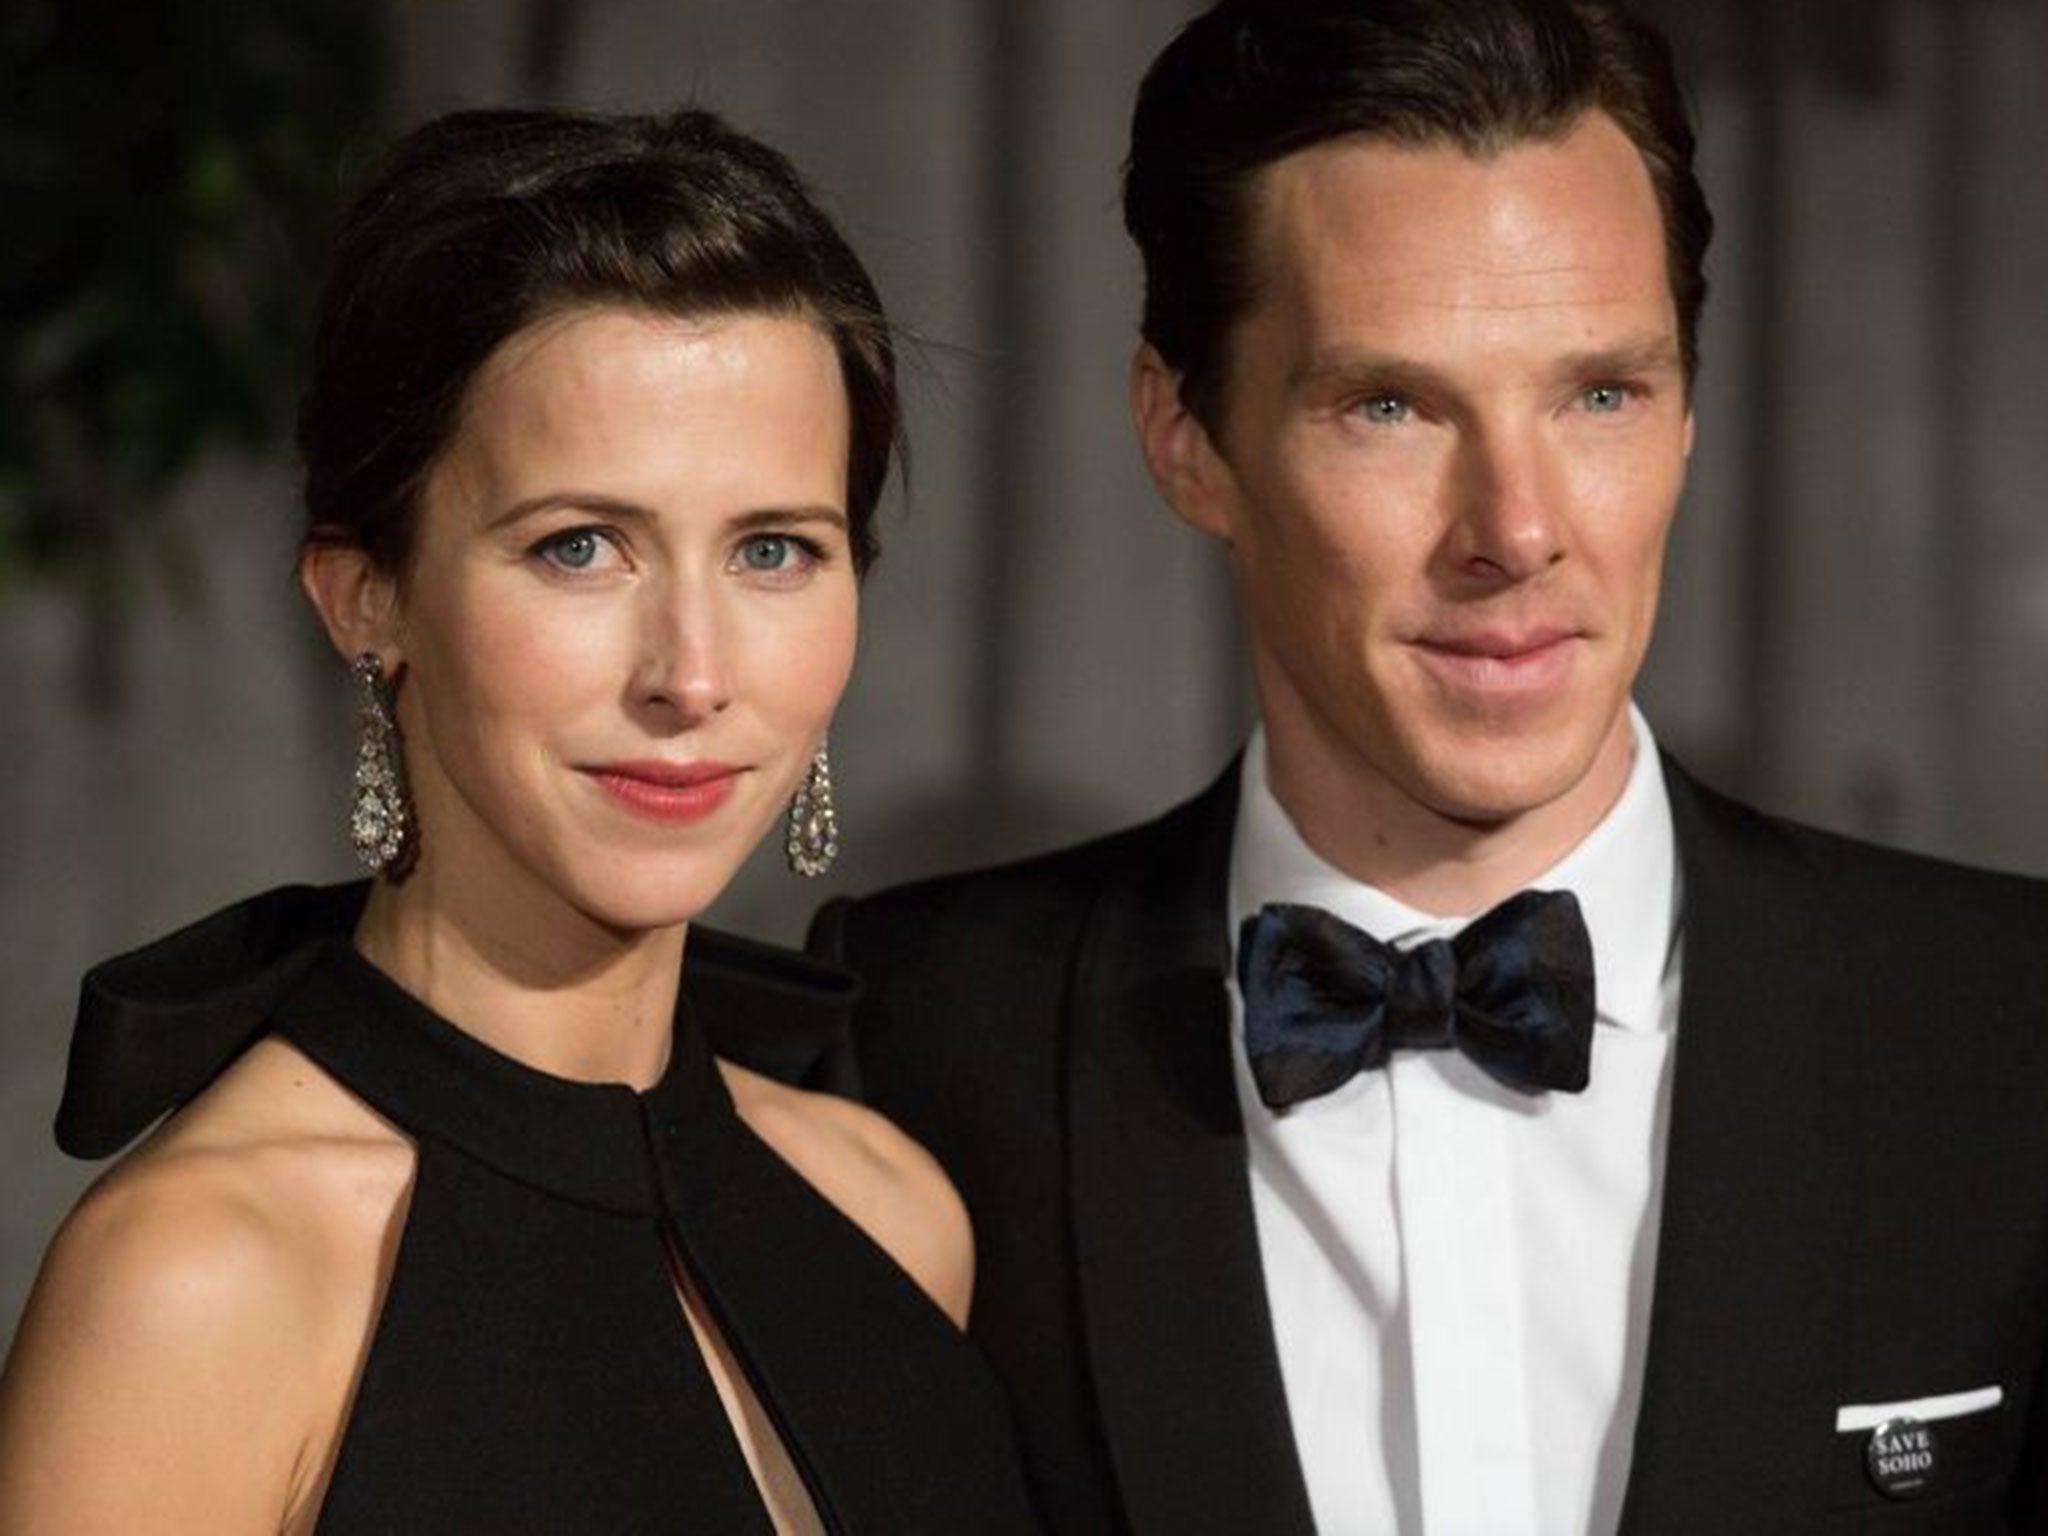 Benedict Cumberbatch Marries Sophie Hunter At A Private Ceremony On The Isle Of Wight The